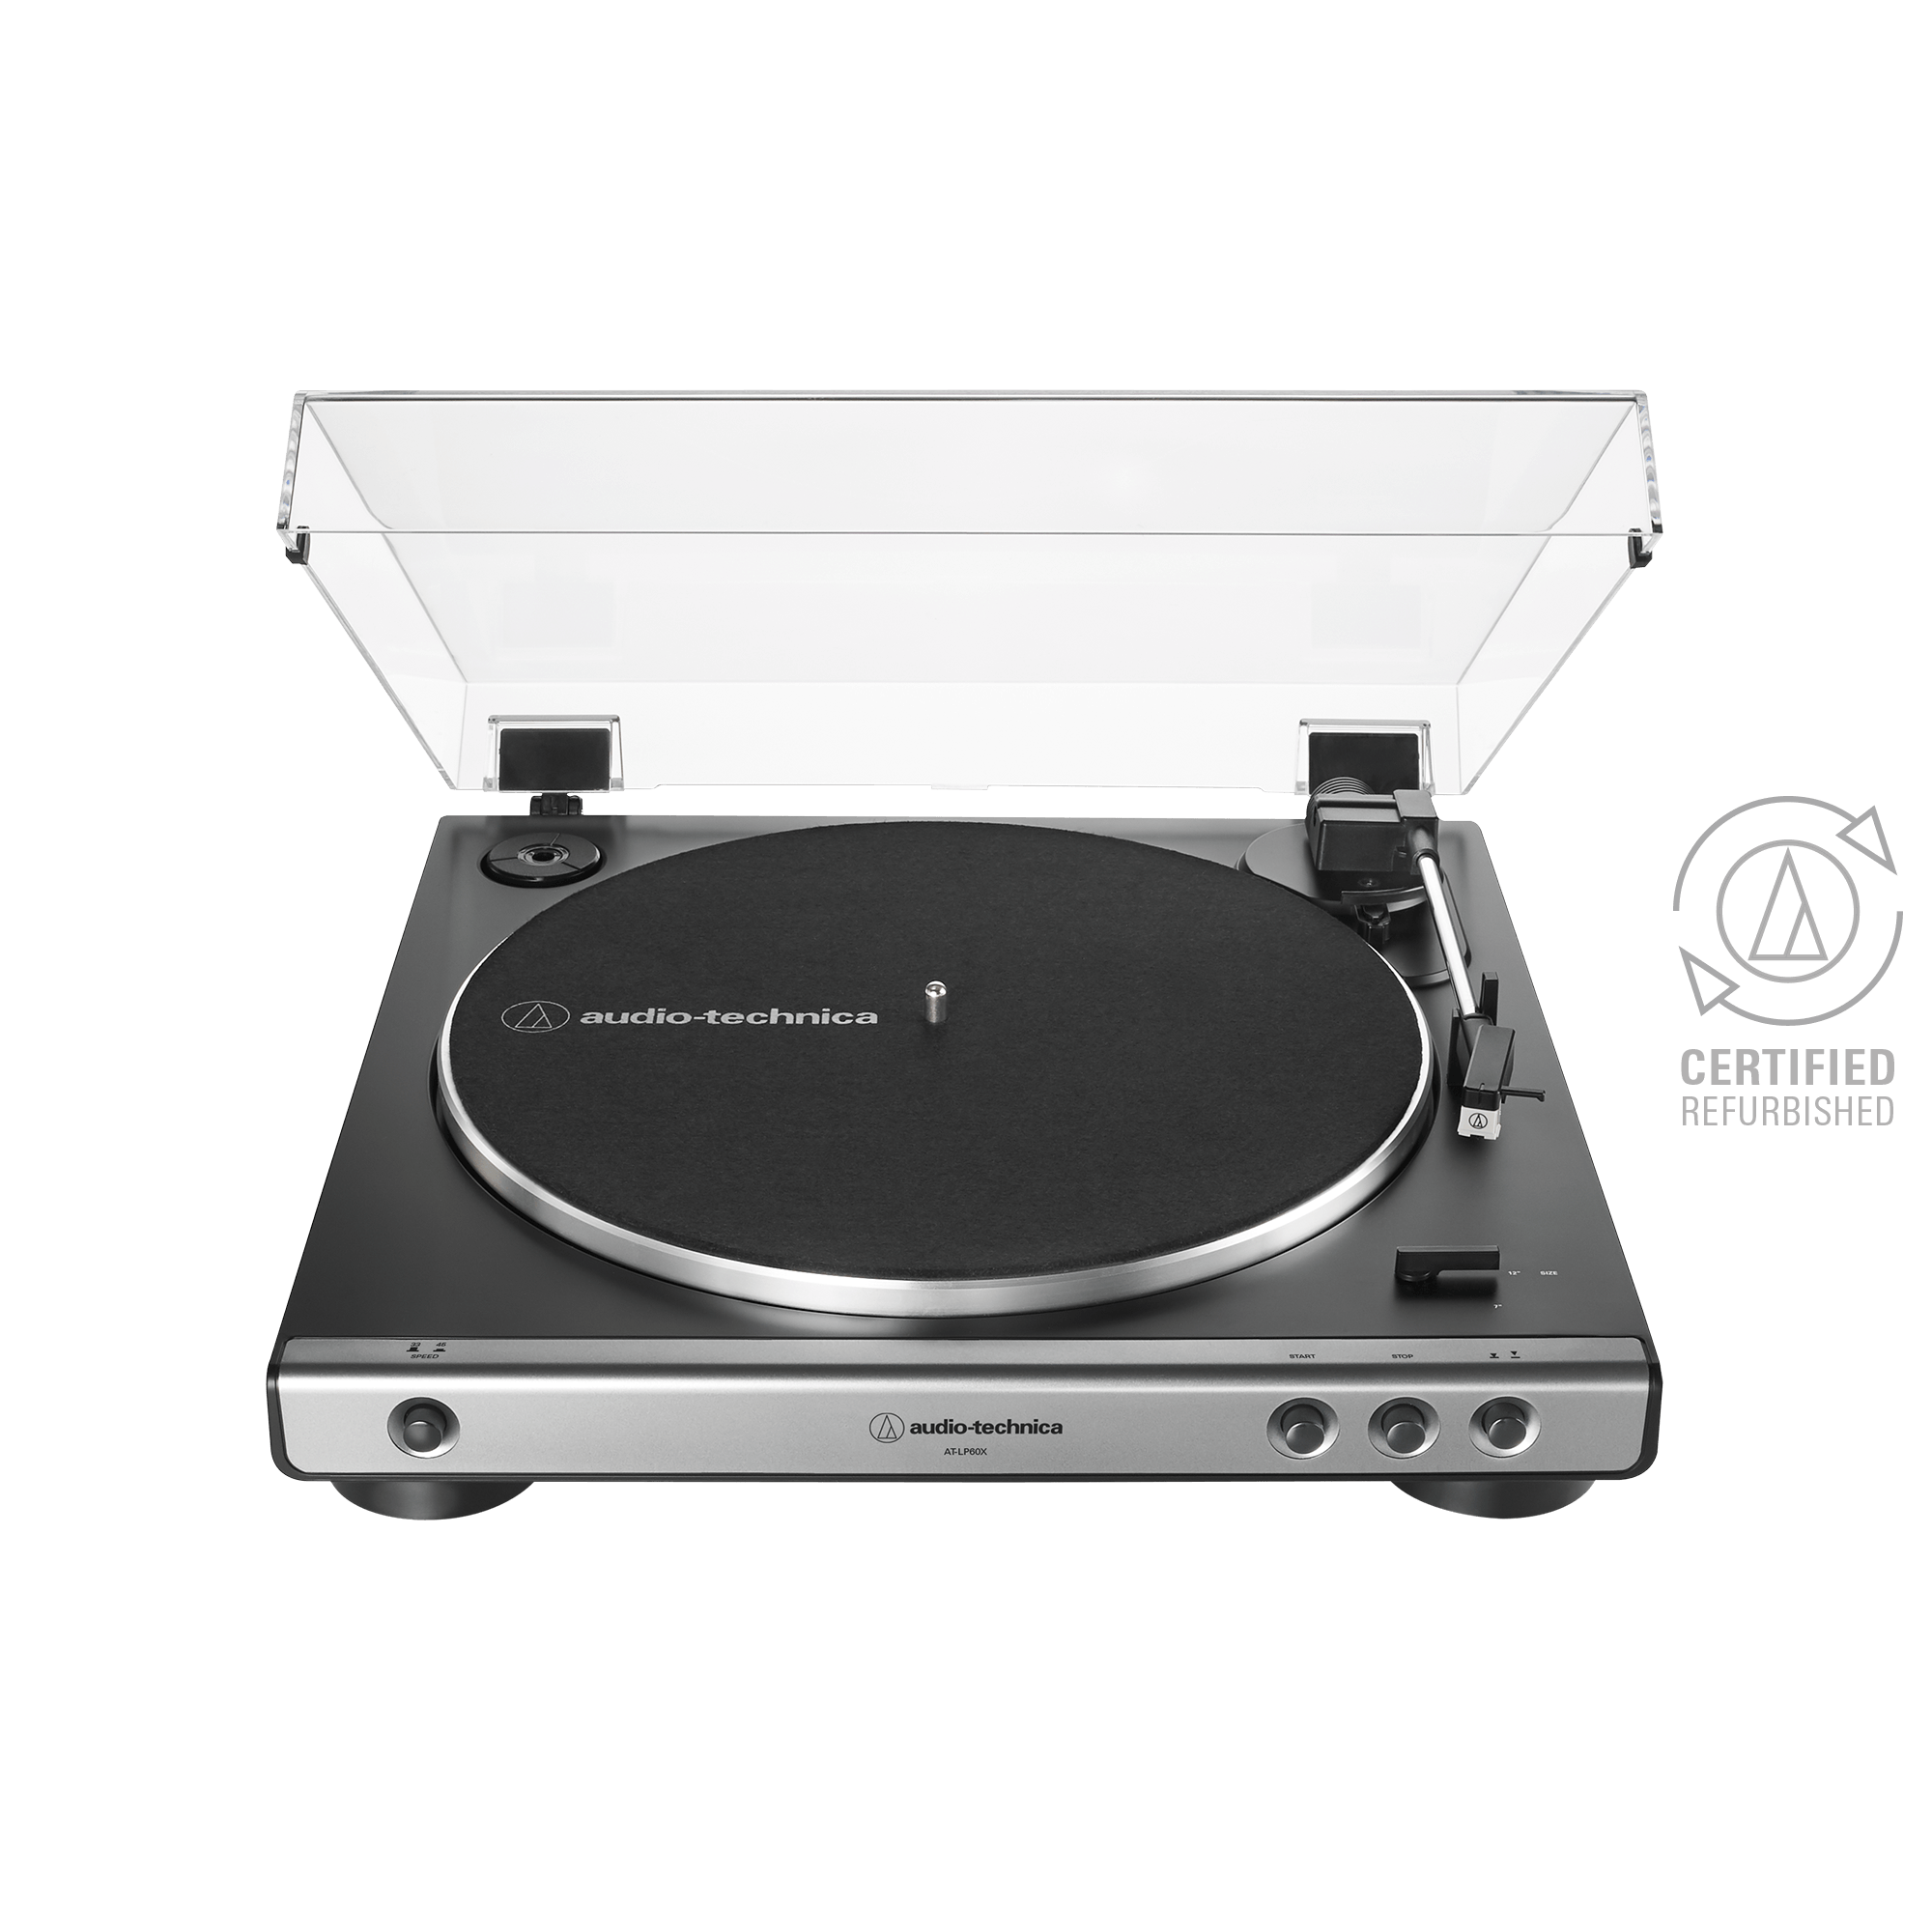 Certified Refurbished Audio-Technica Turntable Sale from $89.50 + Free Shipping